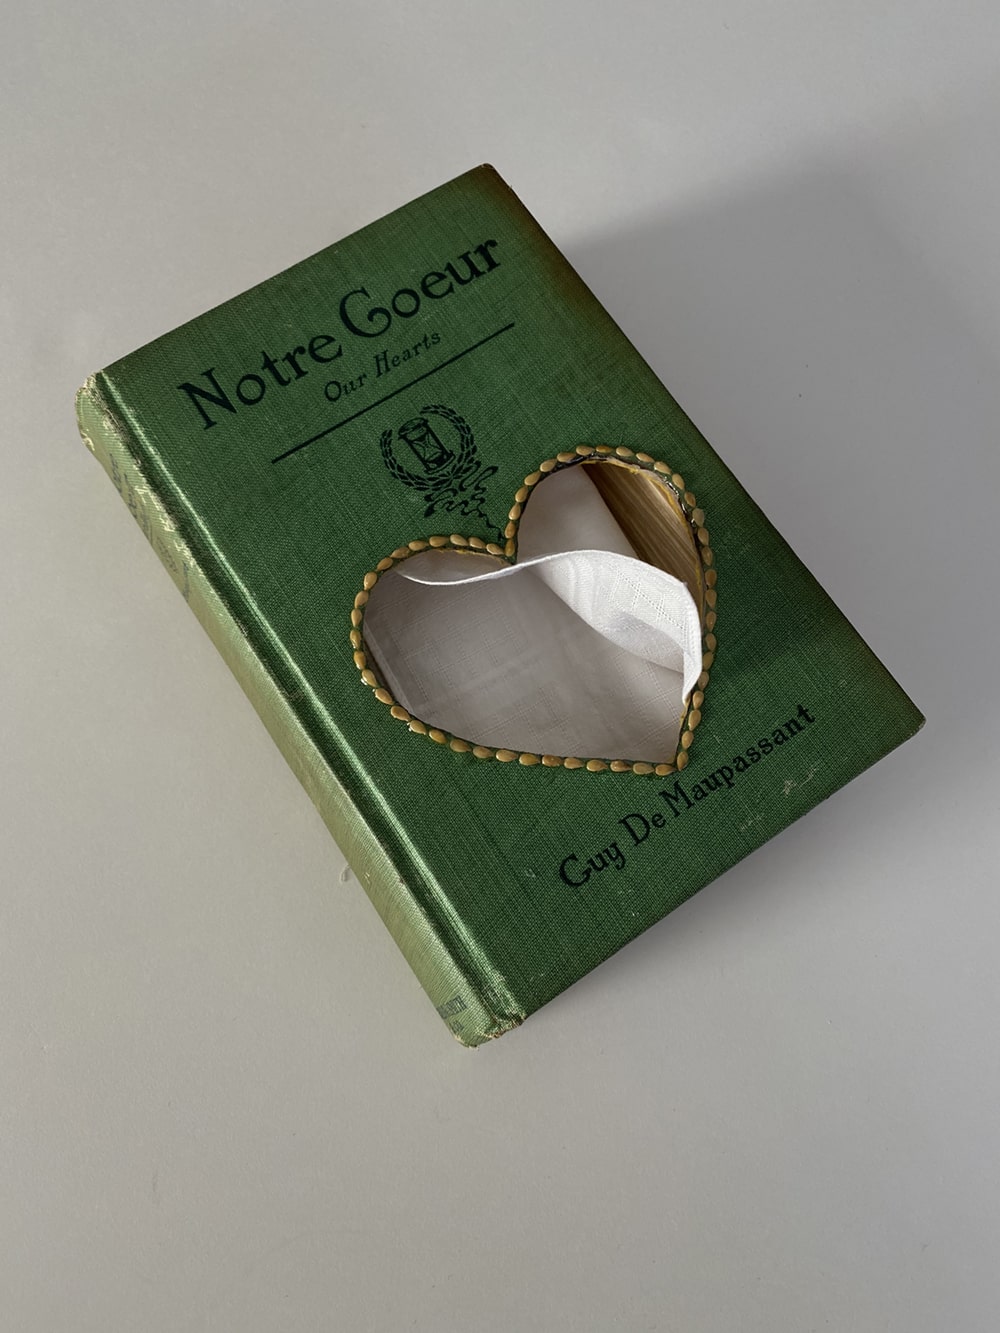 tissue book project Notre coeur 1